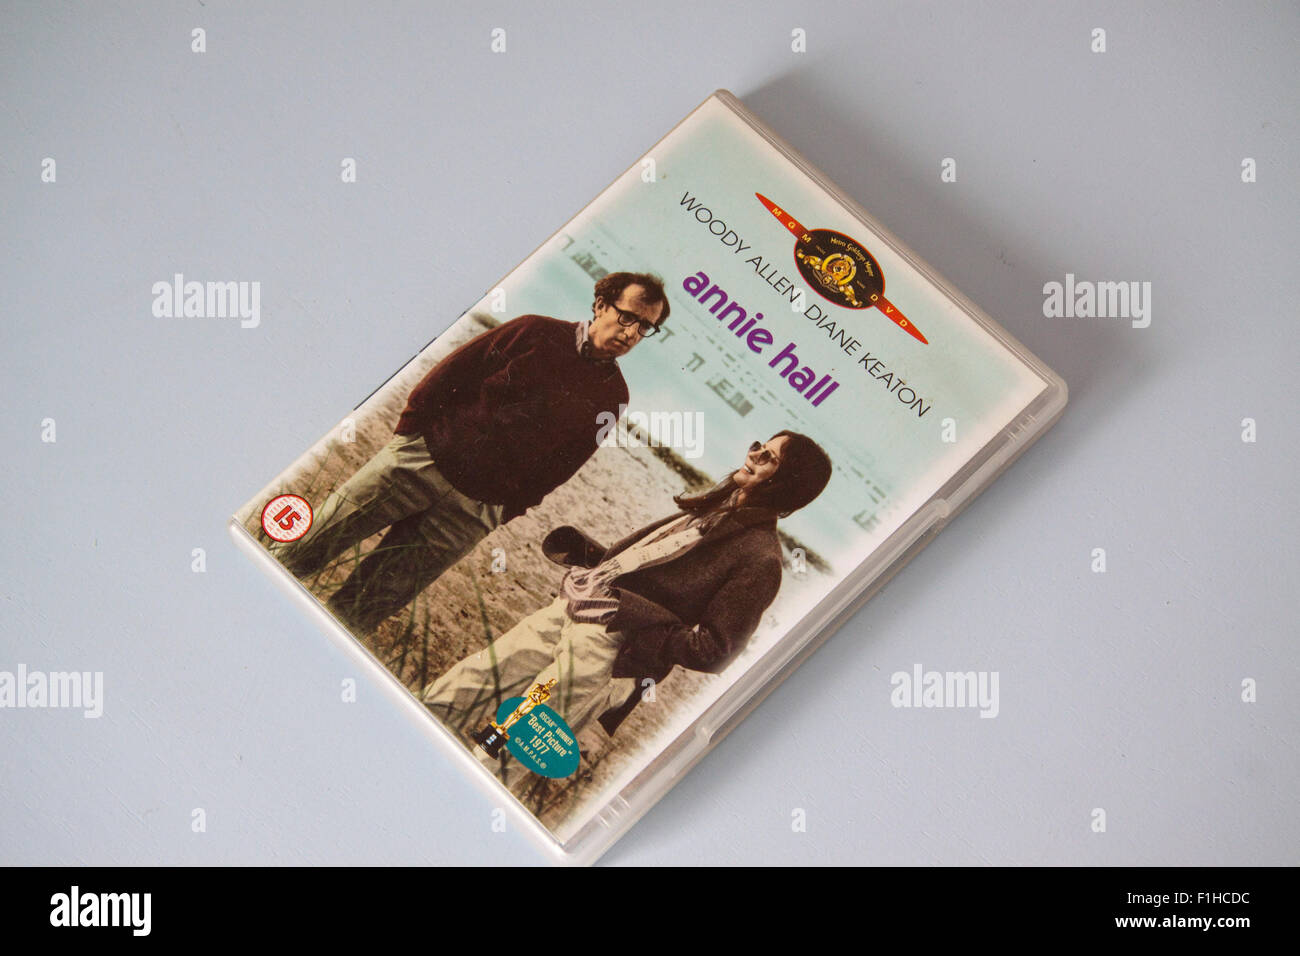 Dvd case for the Woody Allen film Annie Hall Stock Photo